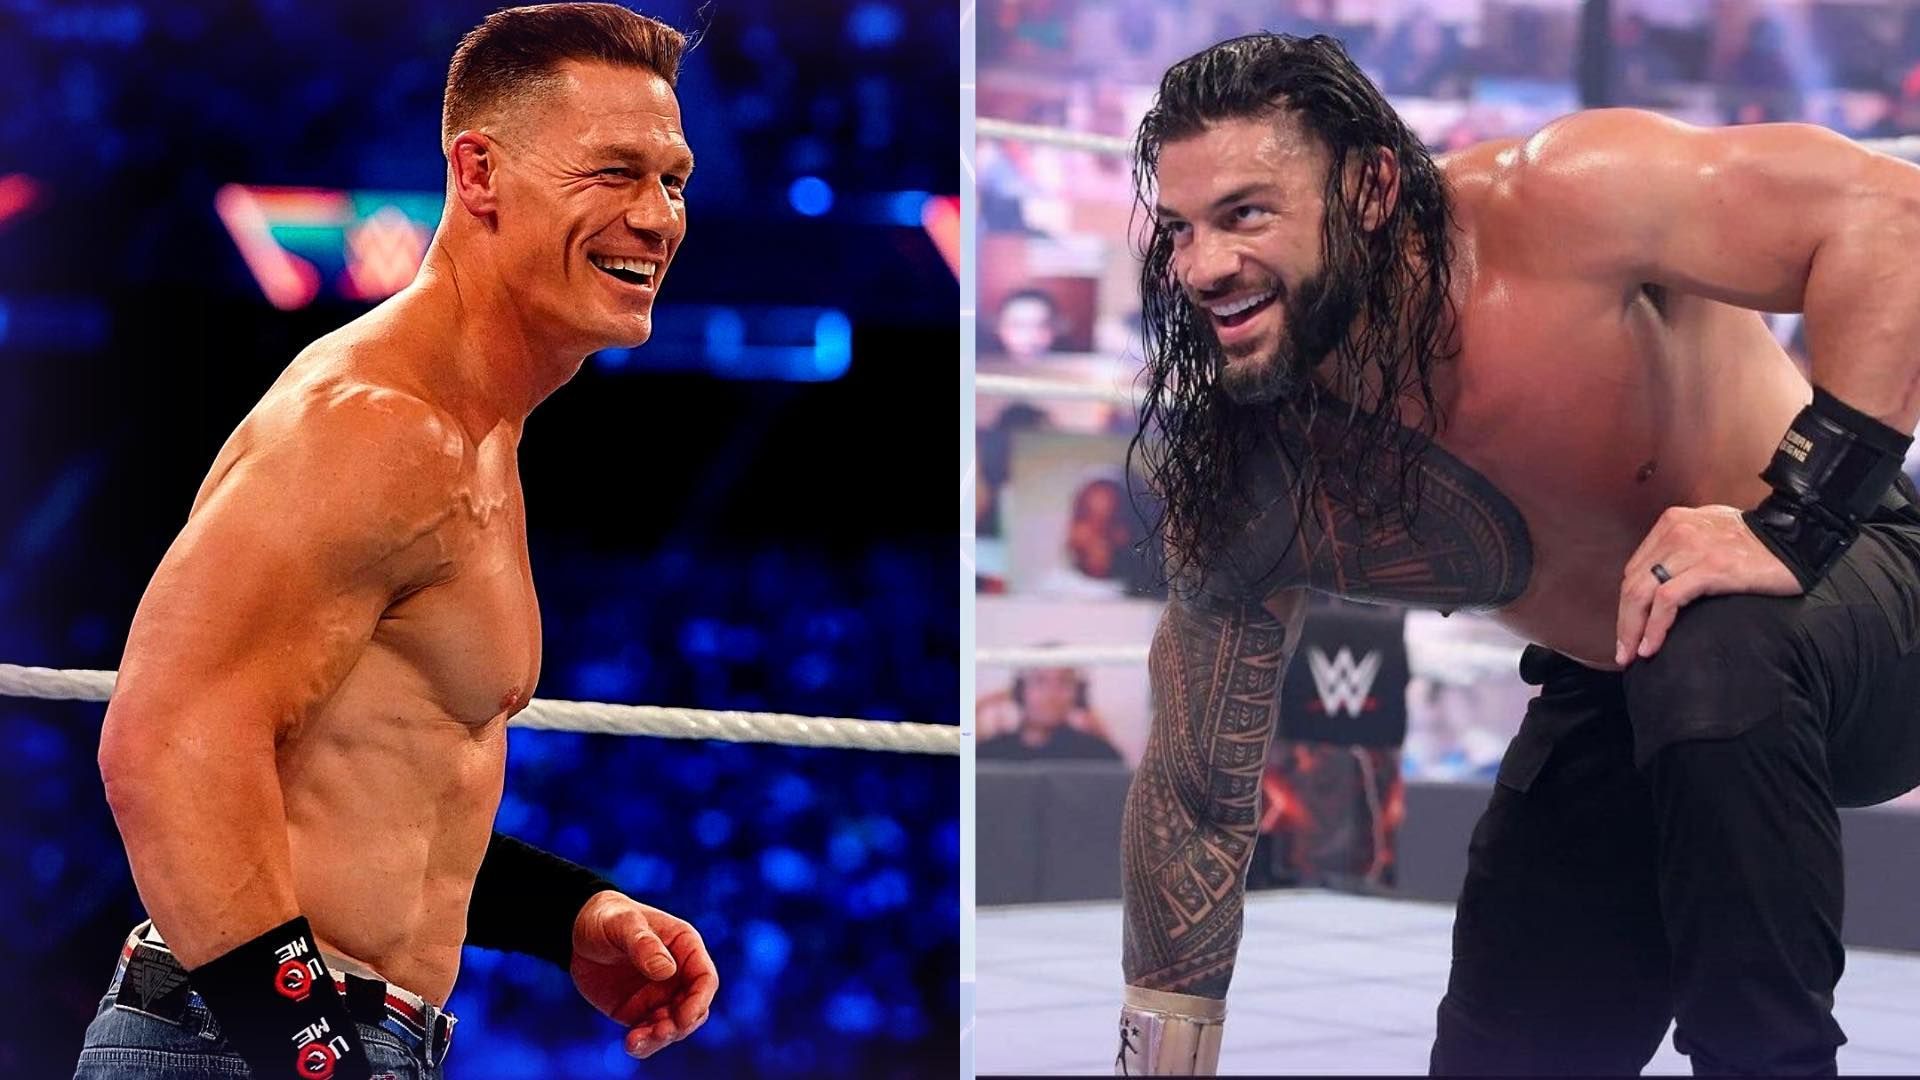 New feuds could kick off on WWE SmackDown